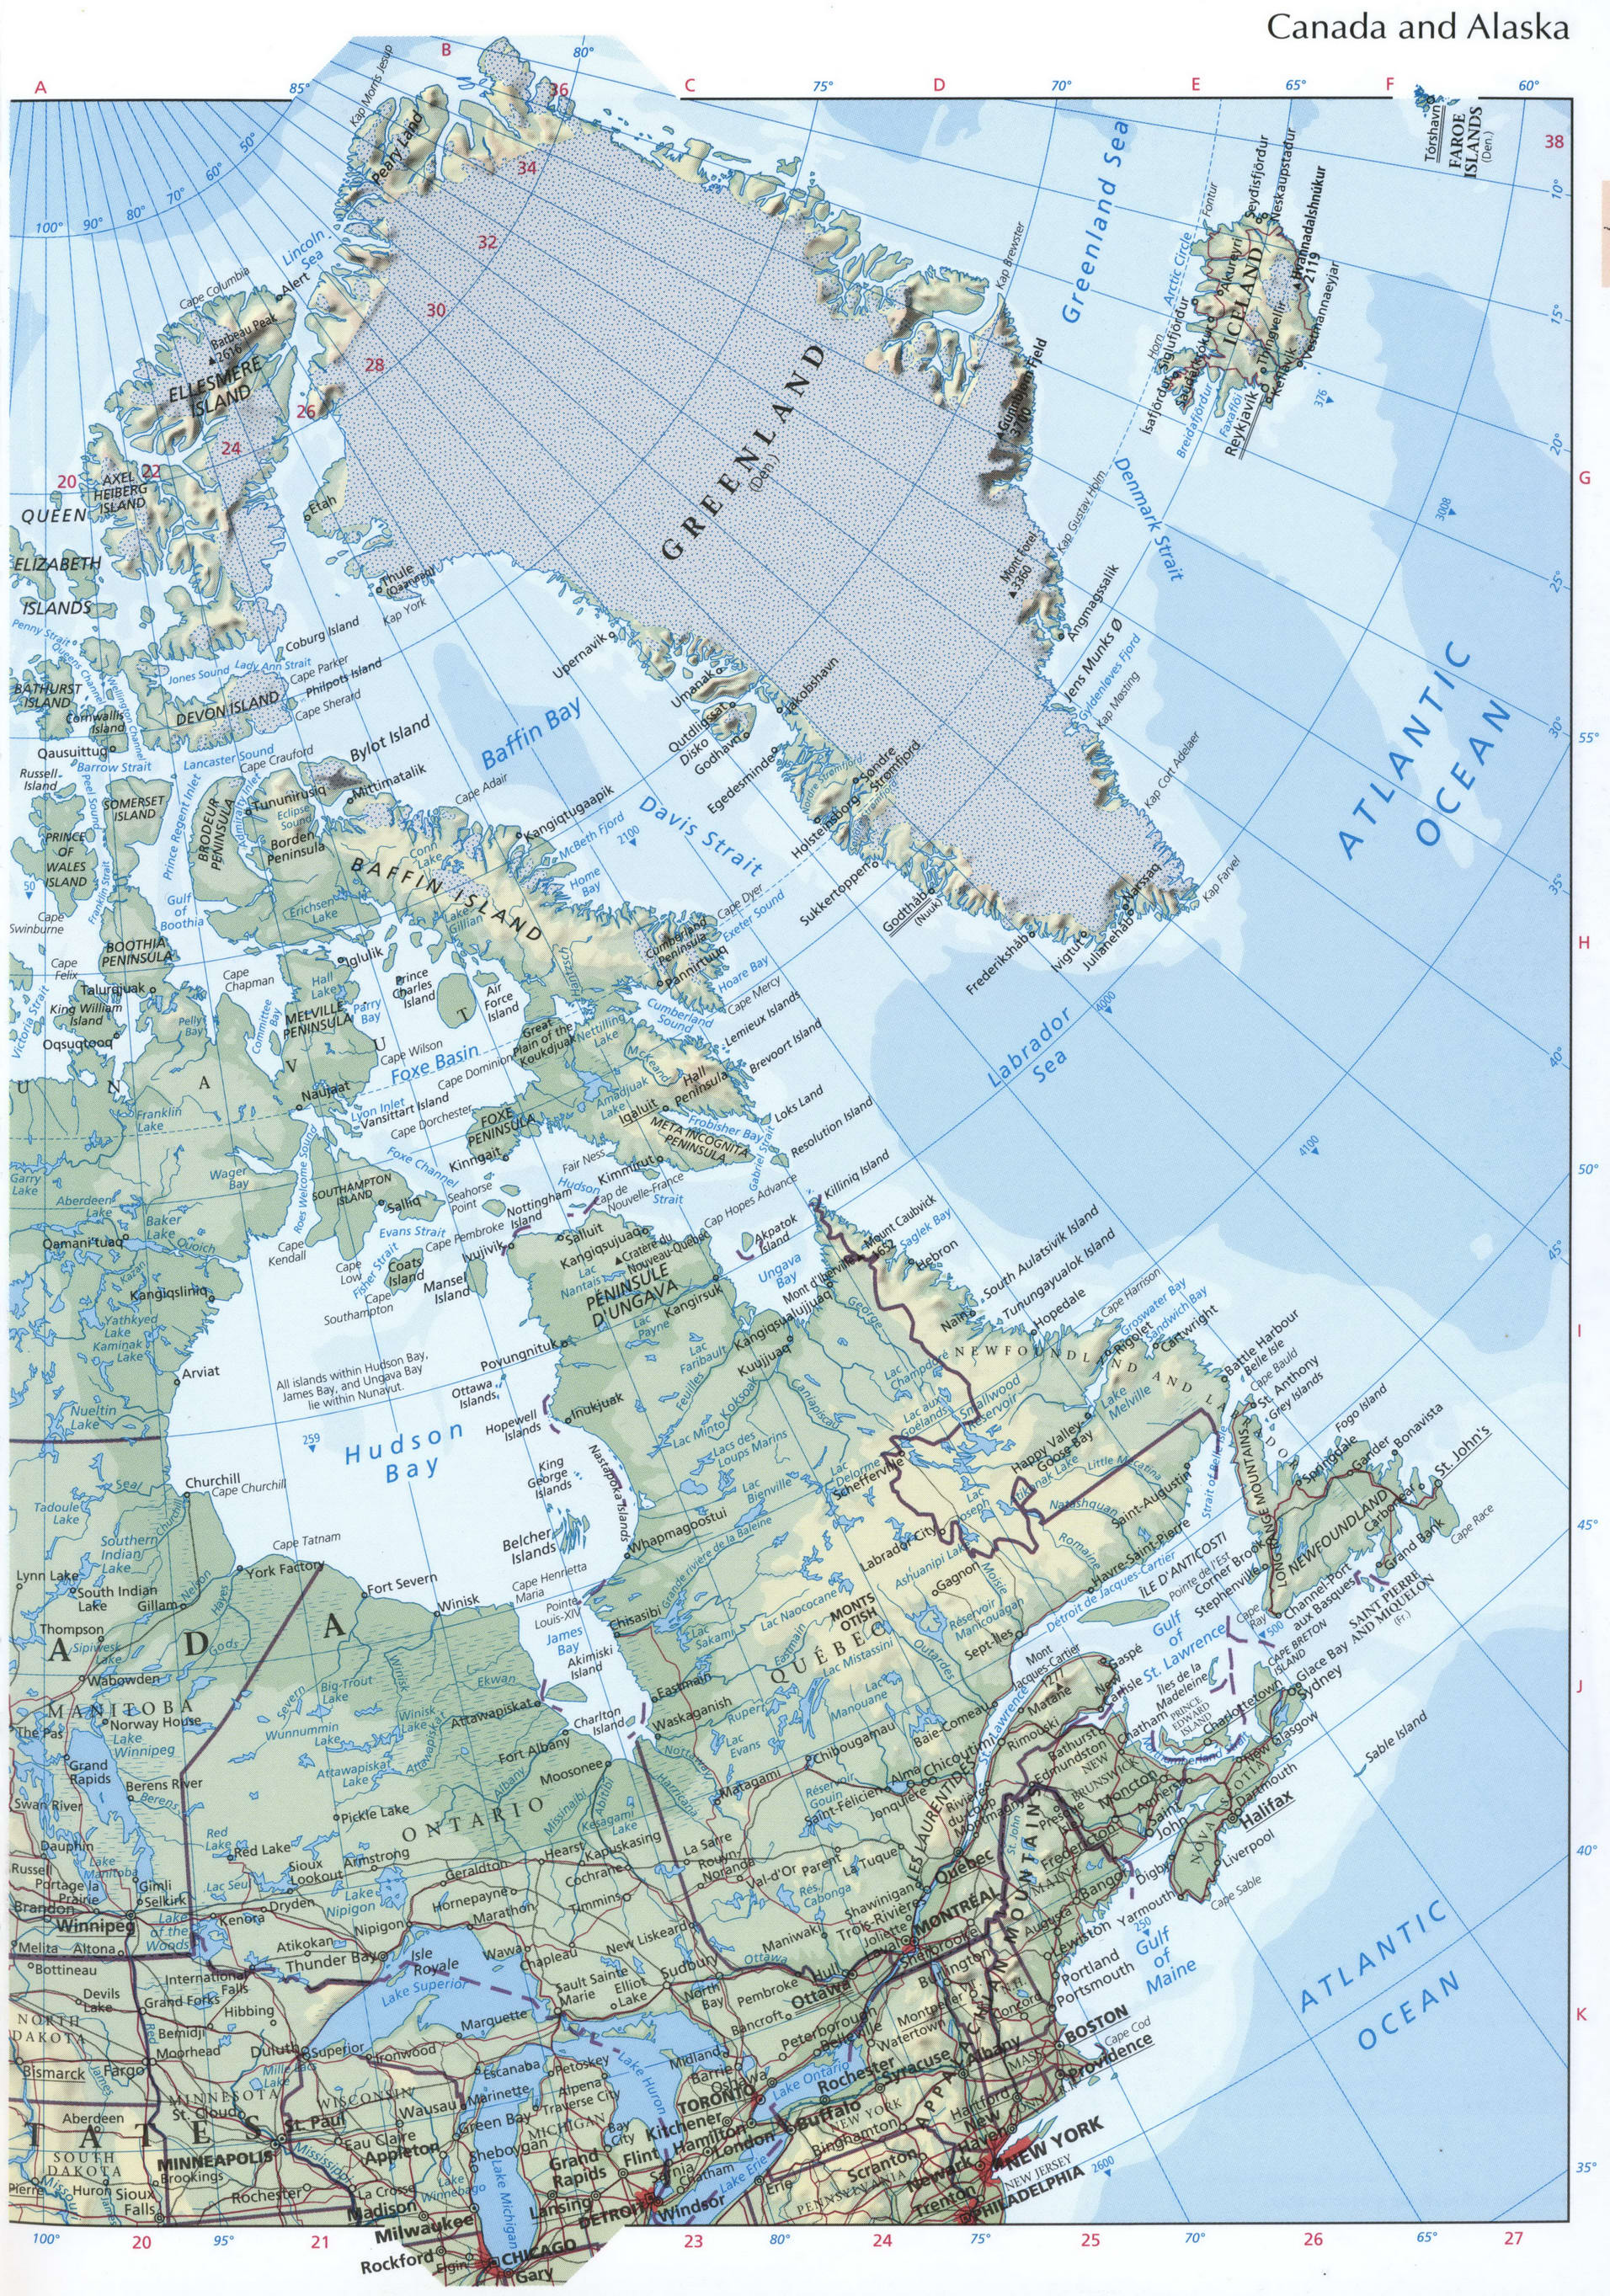 Eastern Canada geographic map